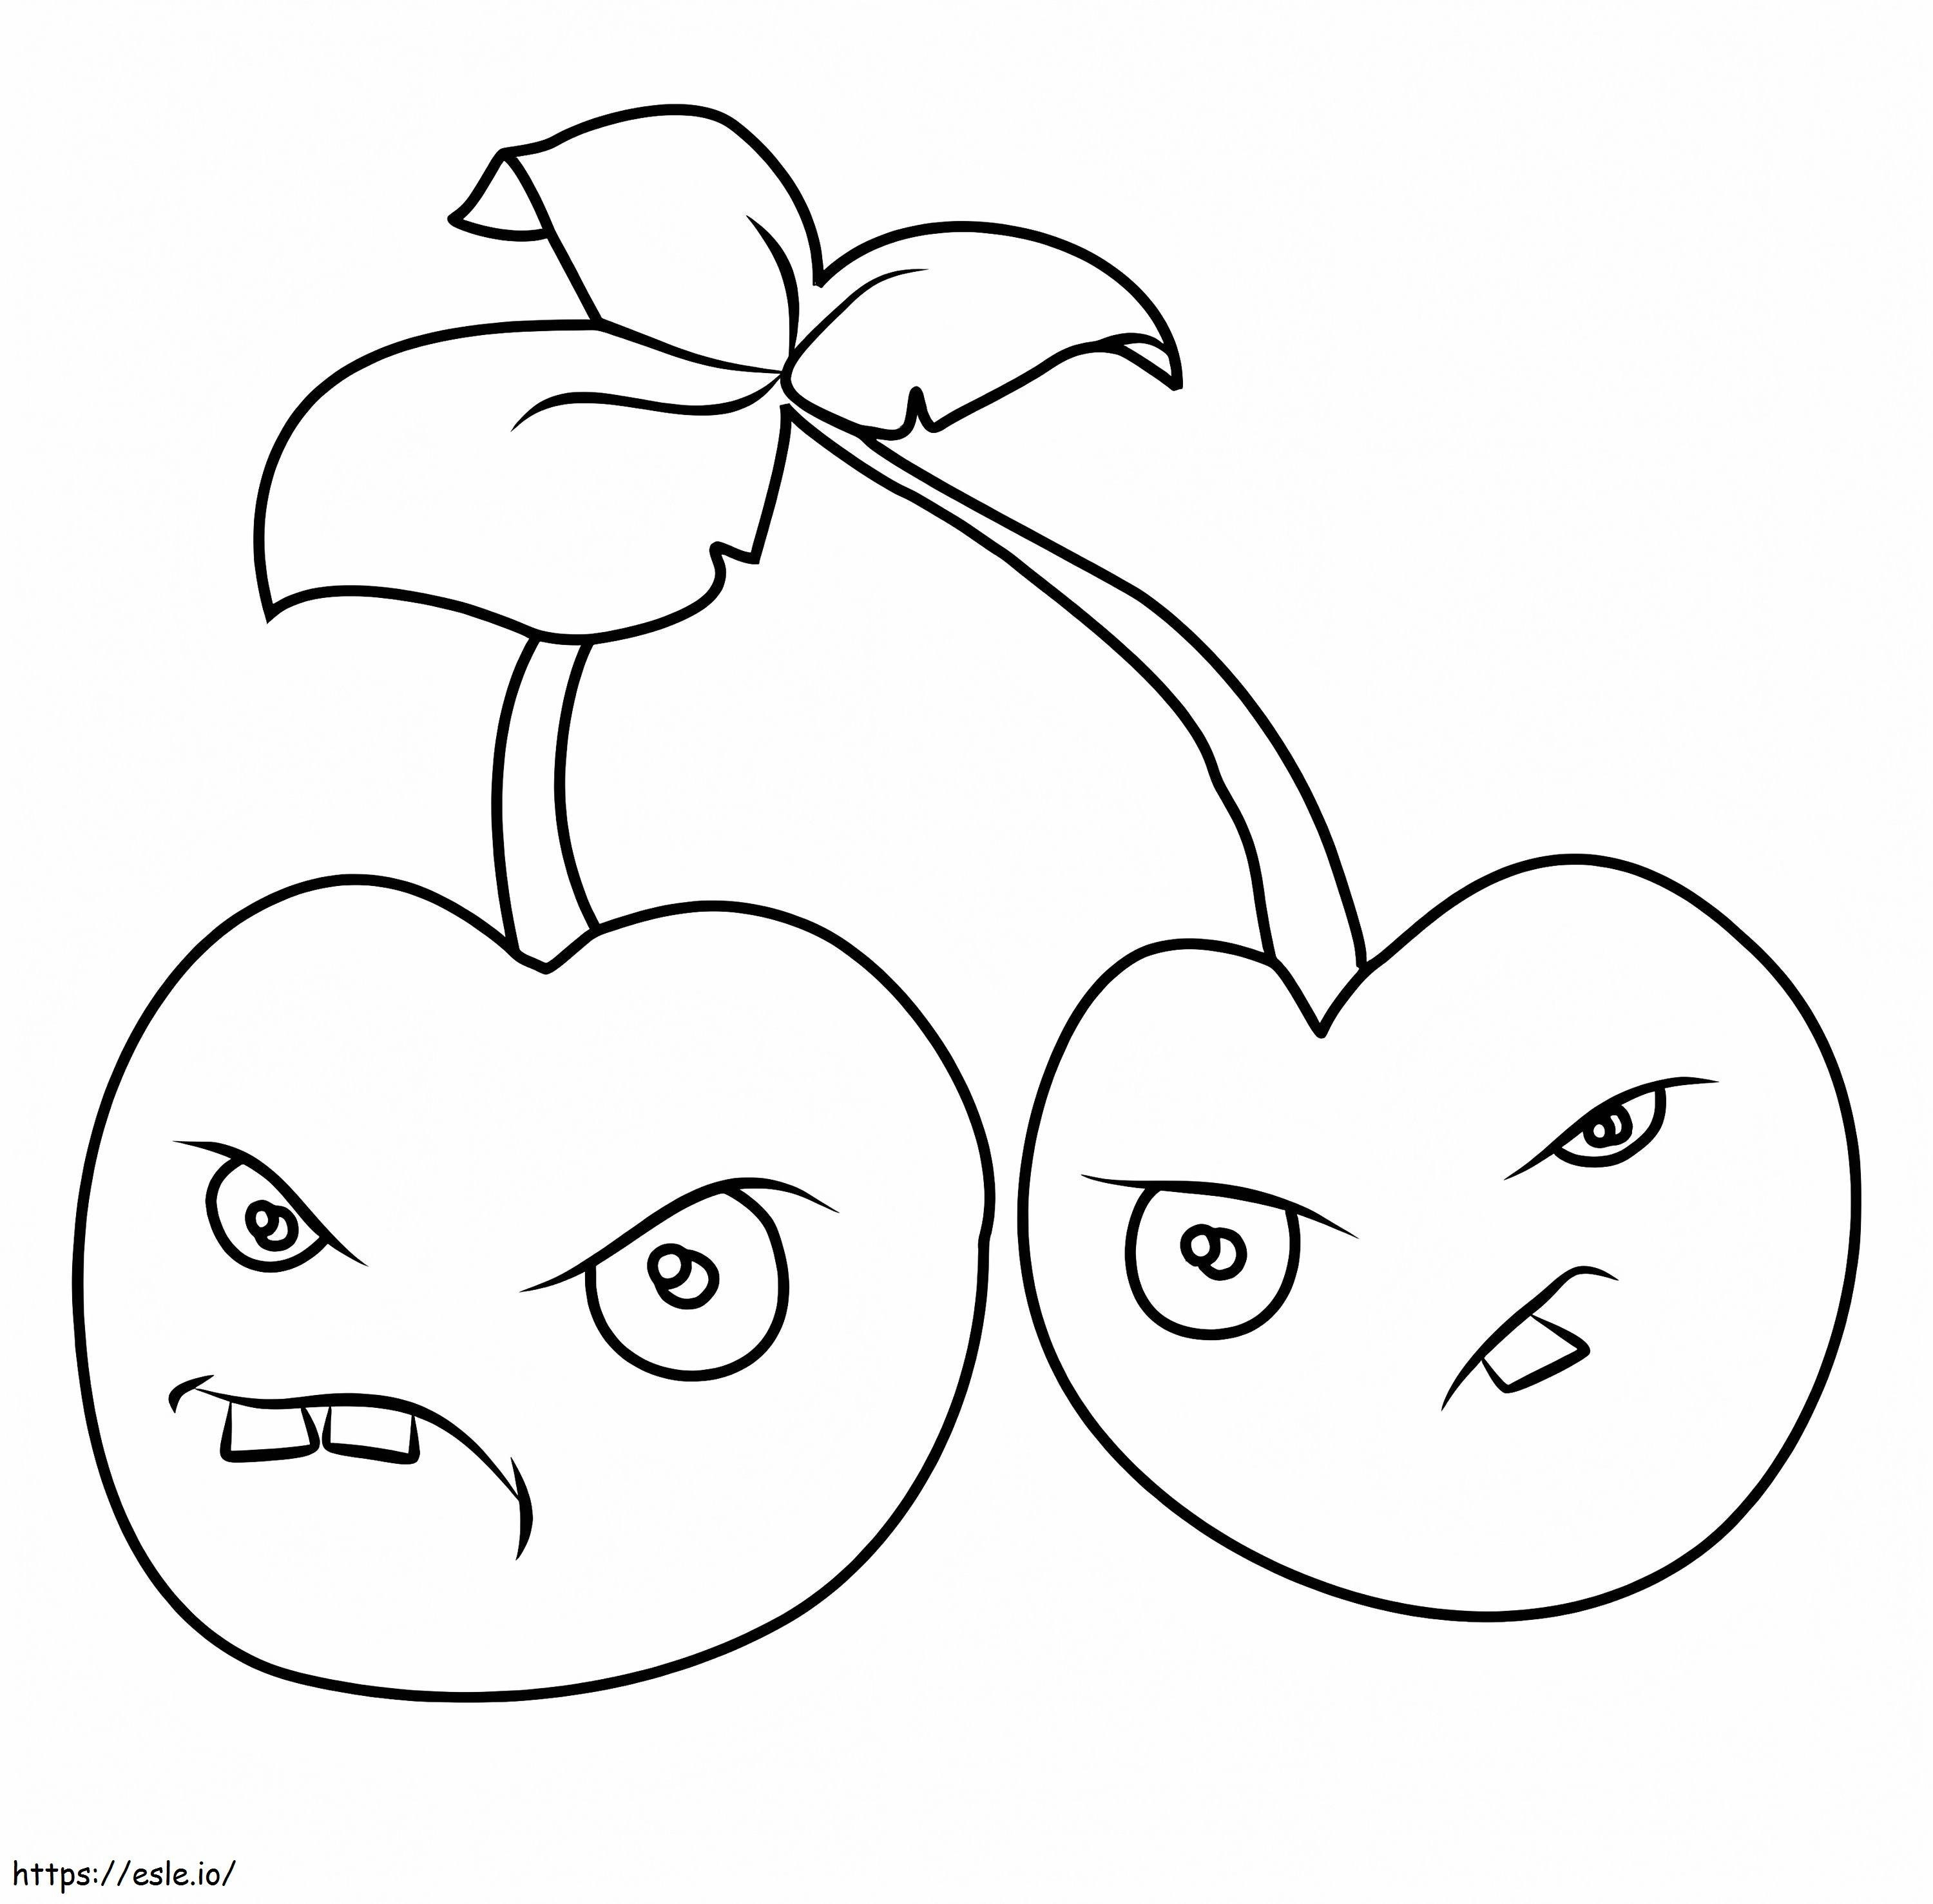 Two Cherry Bomb coloring page